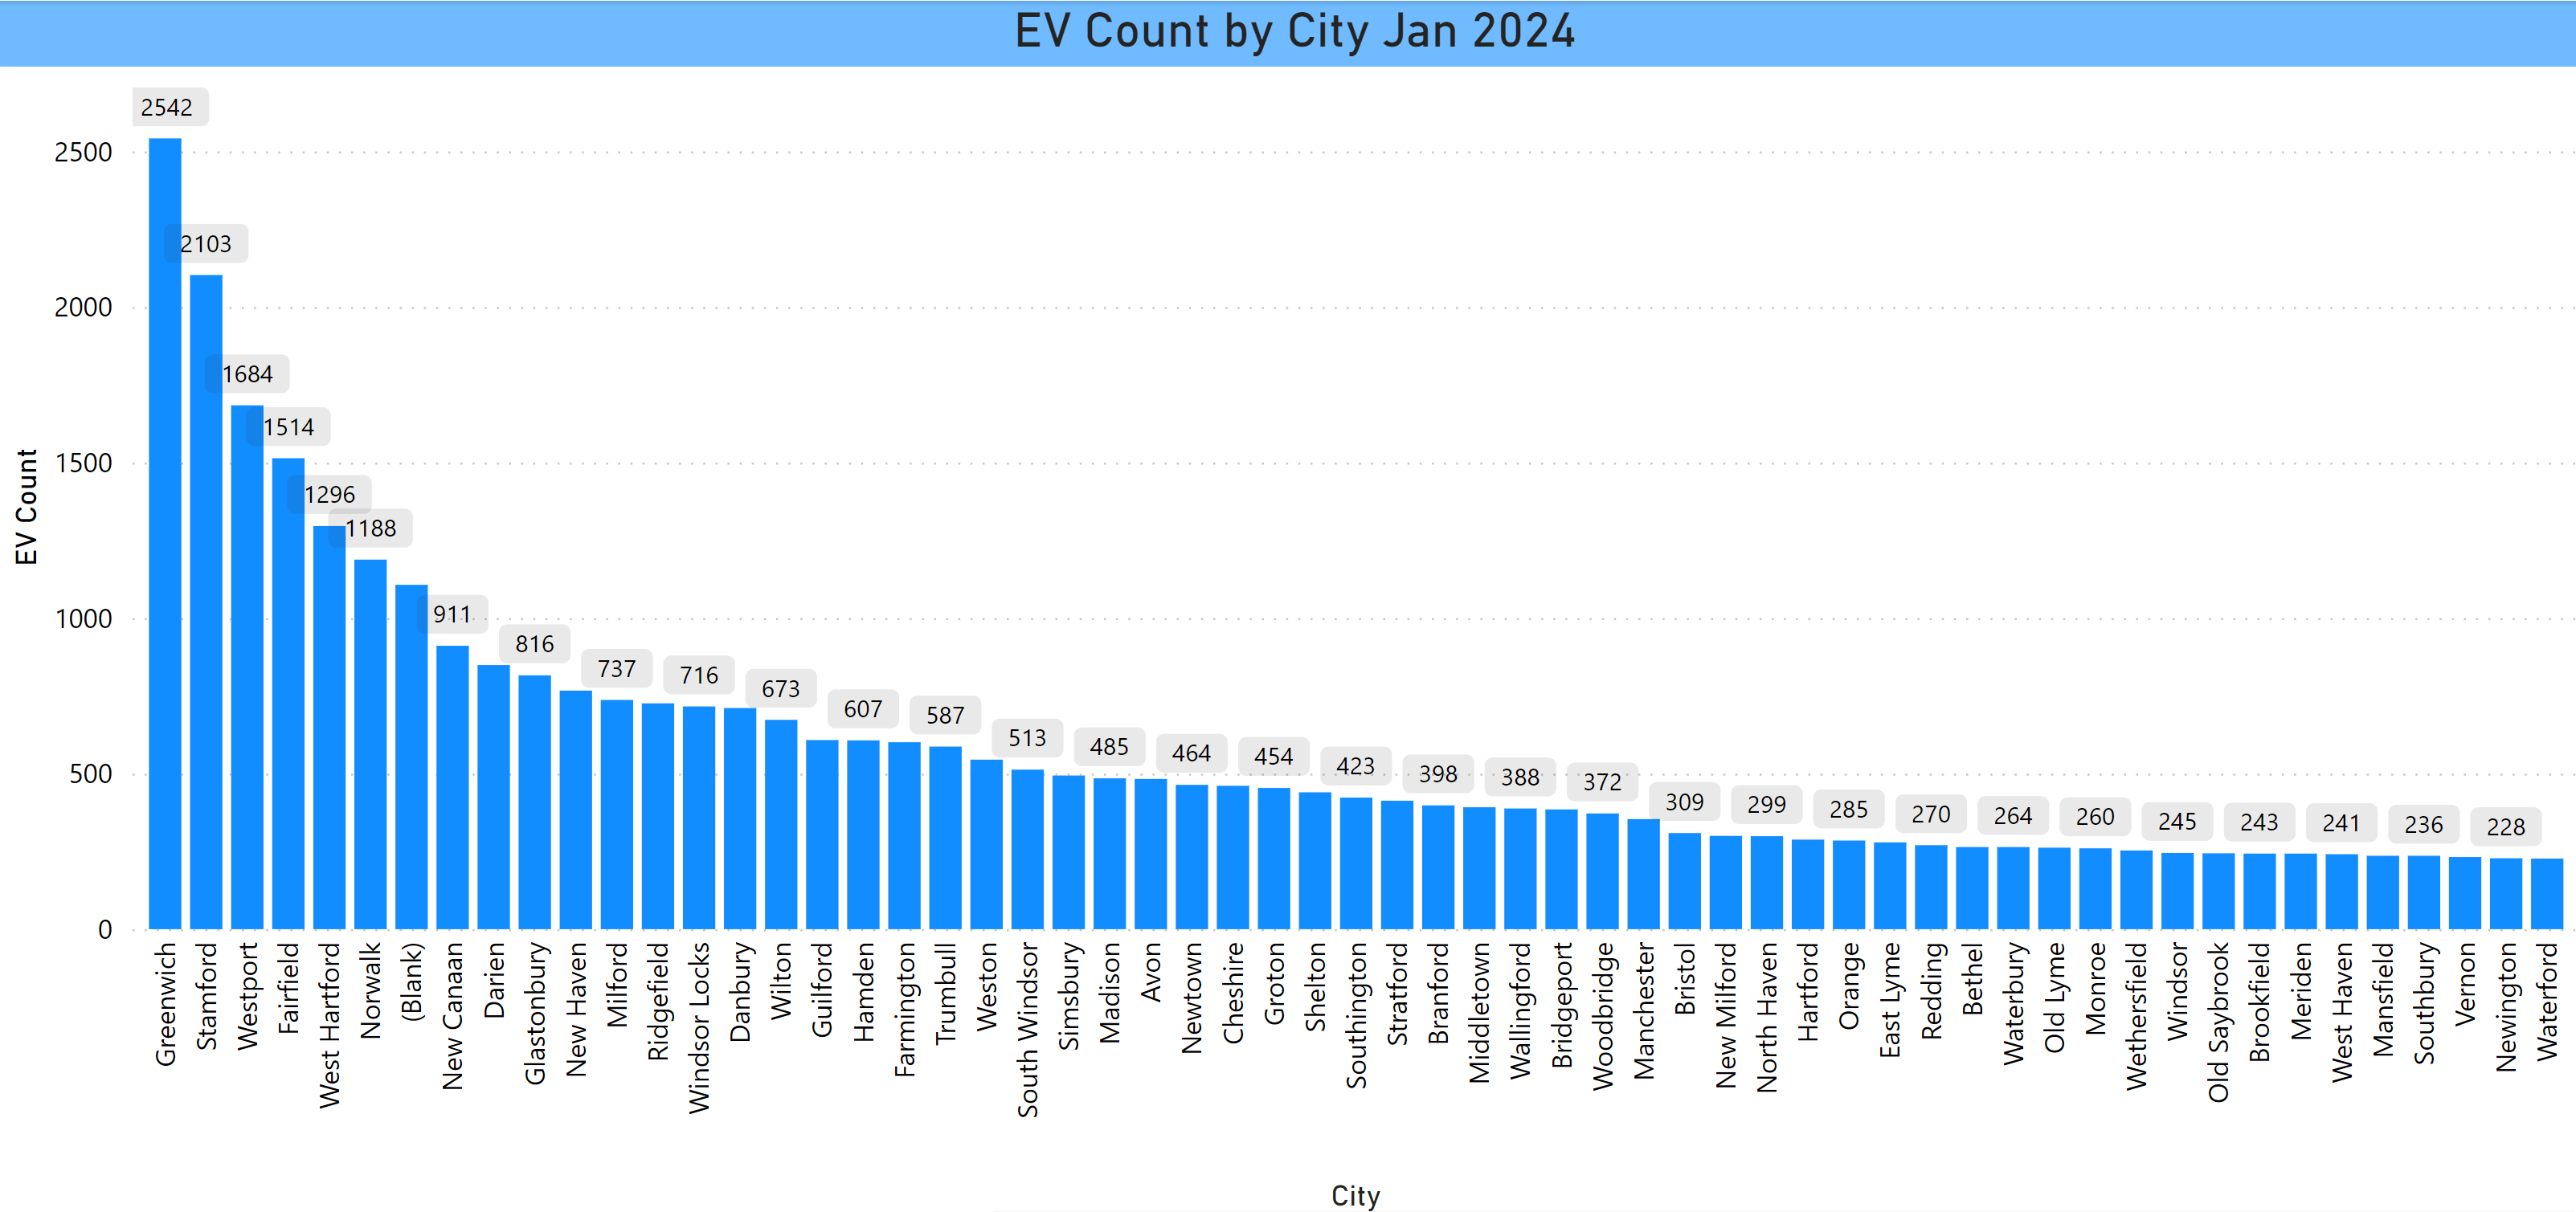 EV Count By City in CT Jan 24